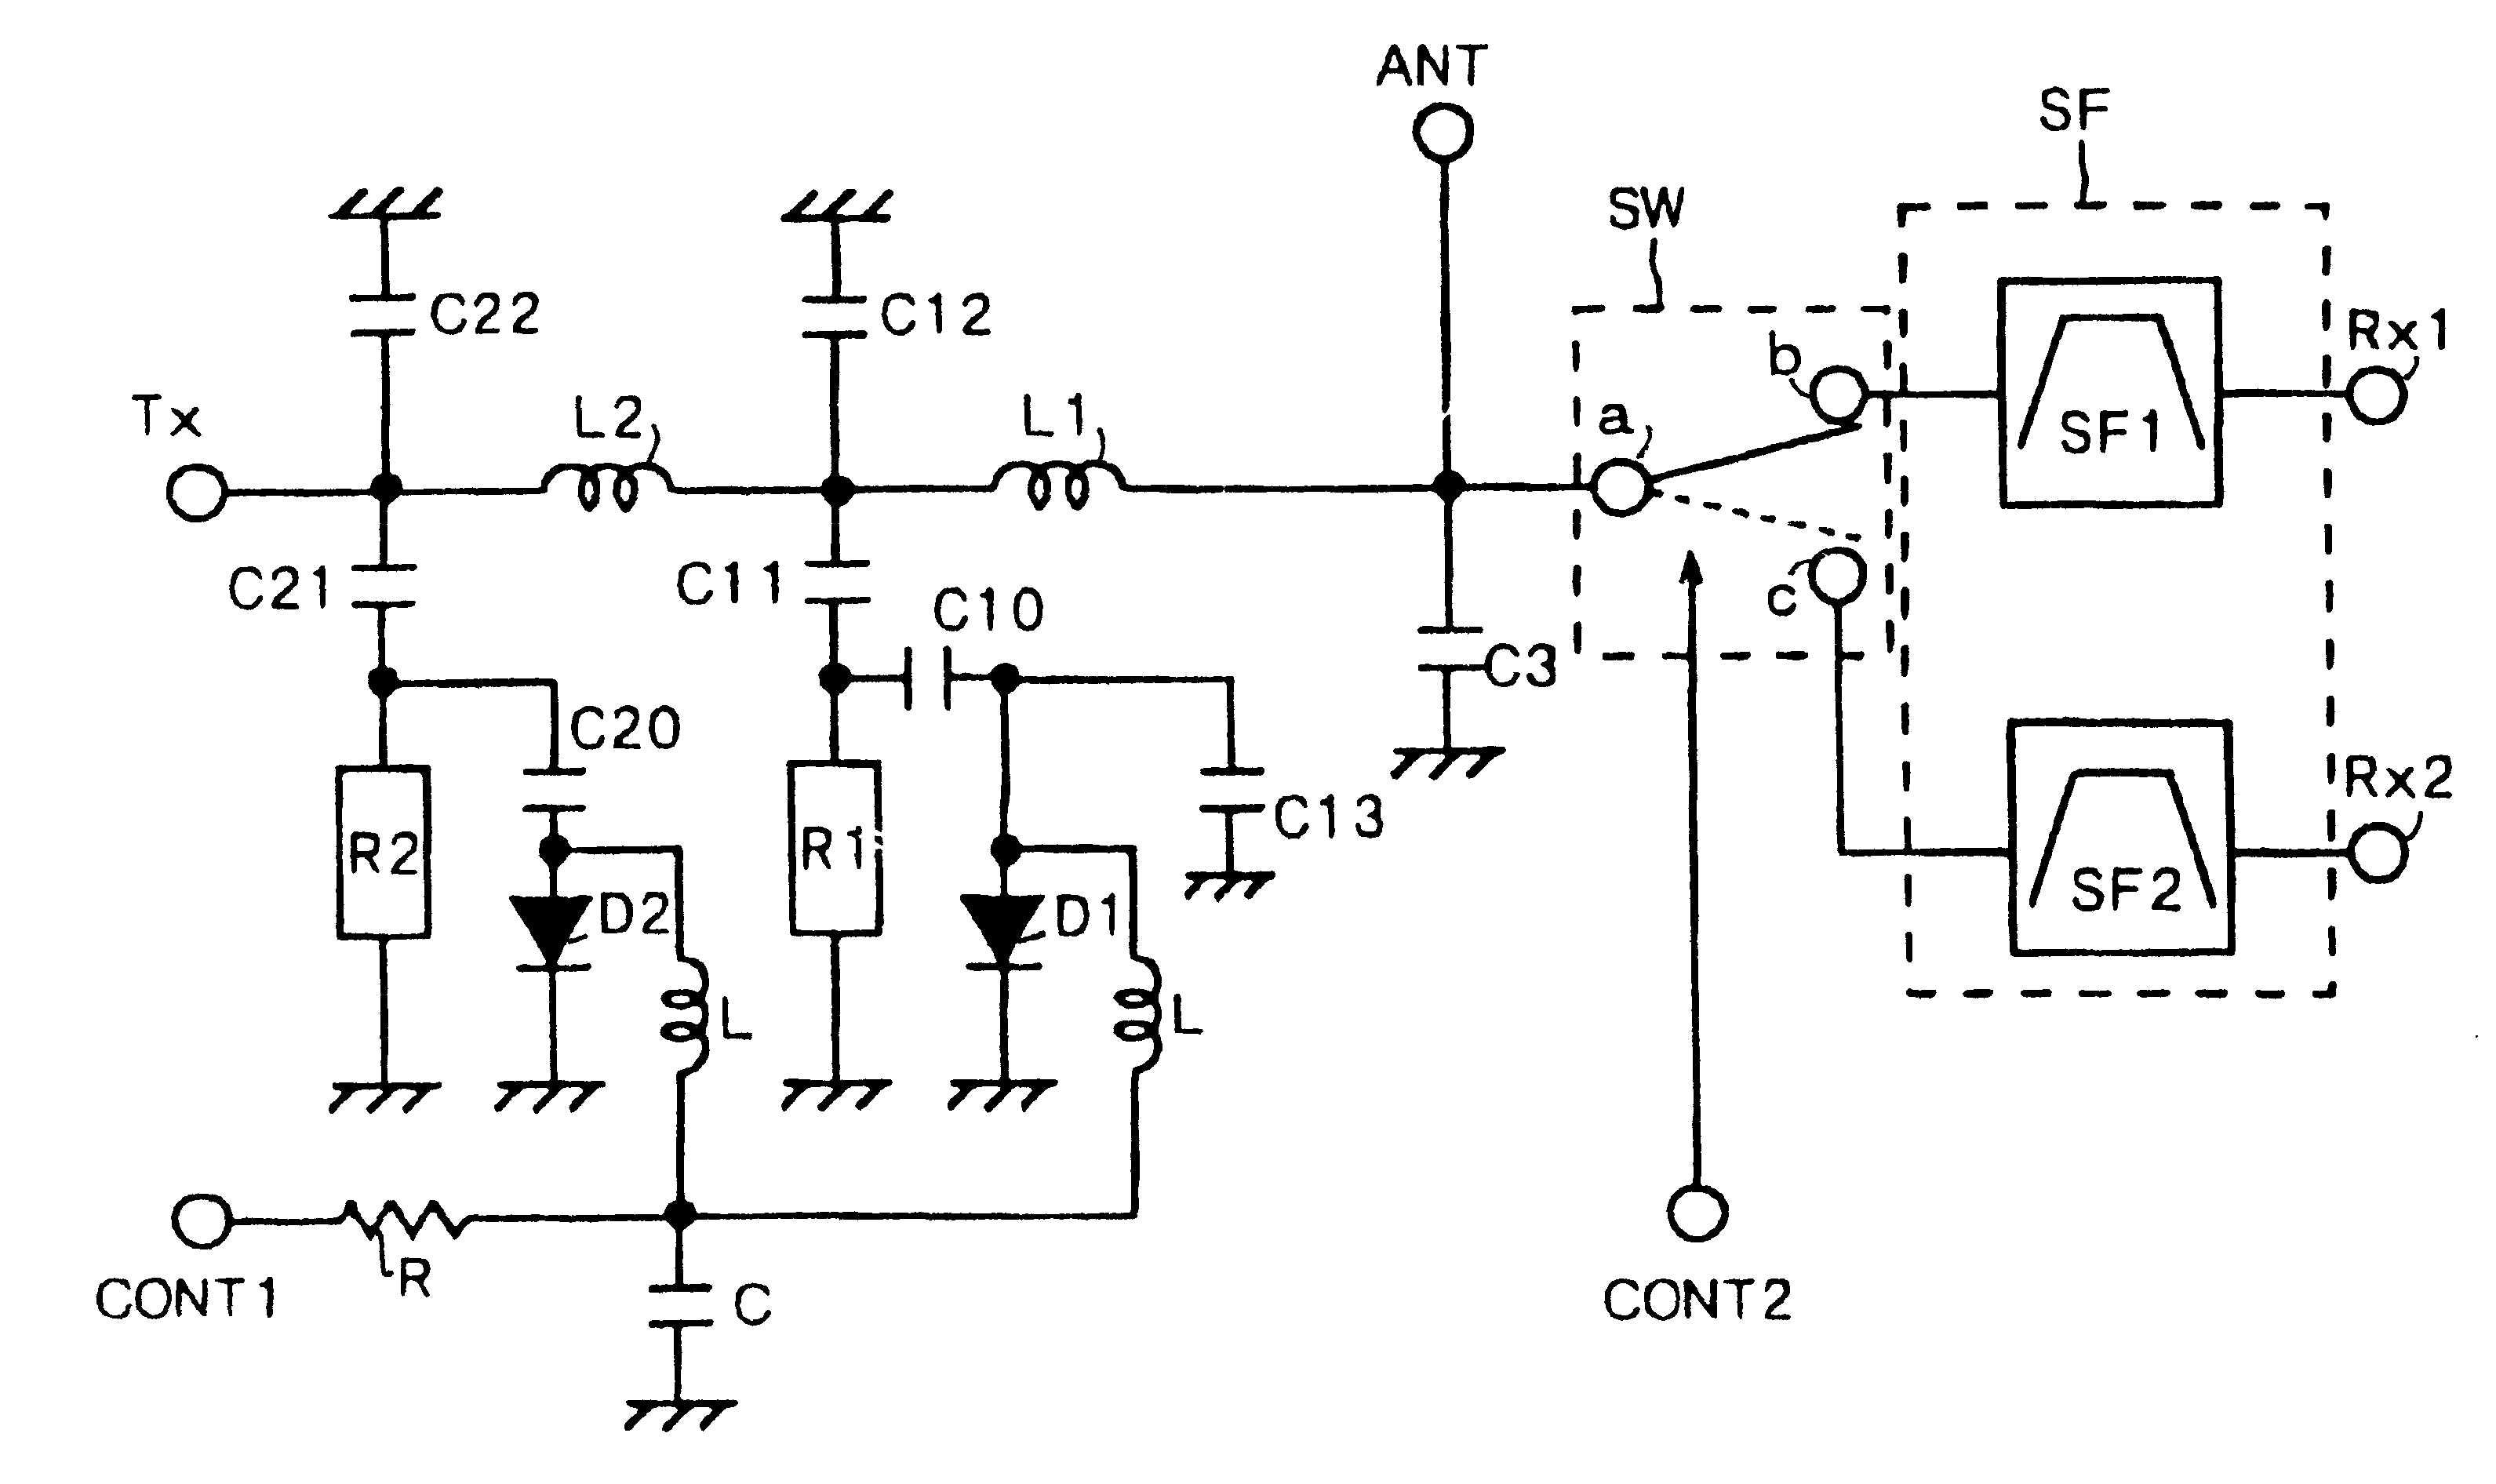 Duplexer and communication apparatus with first and second filters, the second filter having plural switch selectable saw filters